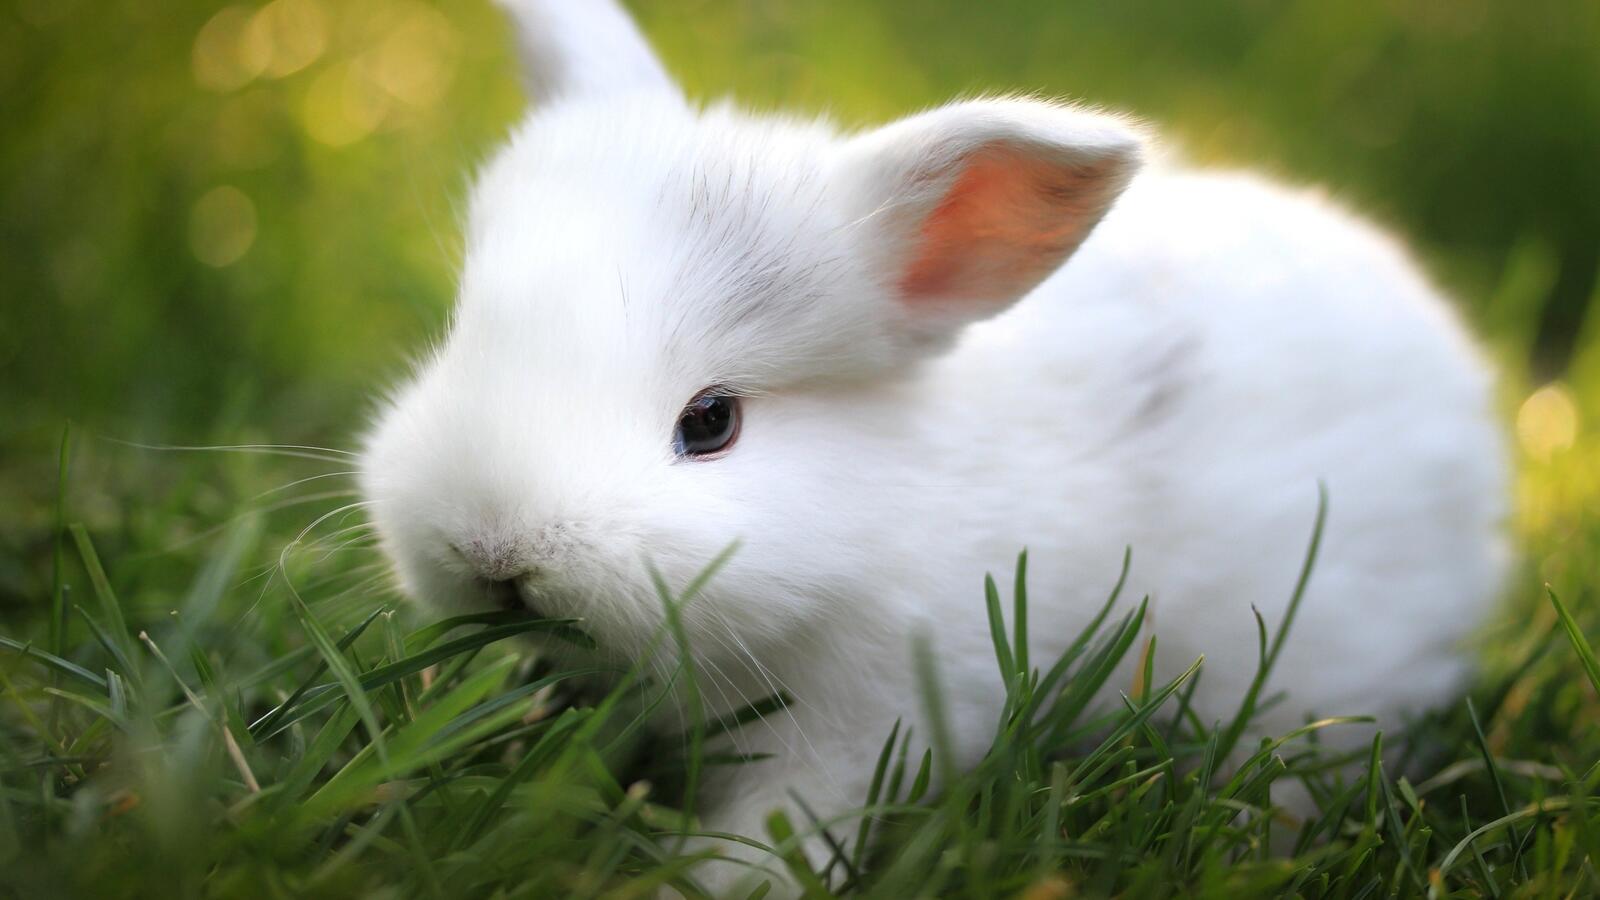 Free photo A very cute white rabbit is eating a blade of grass.